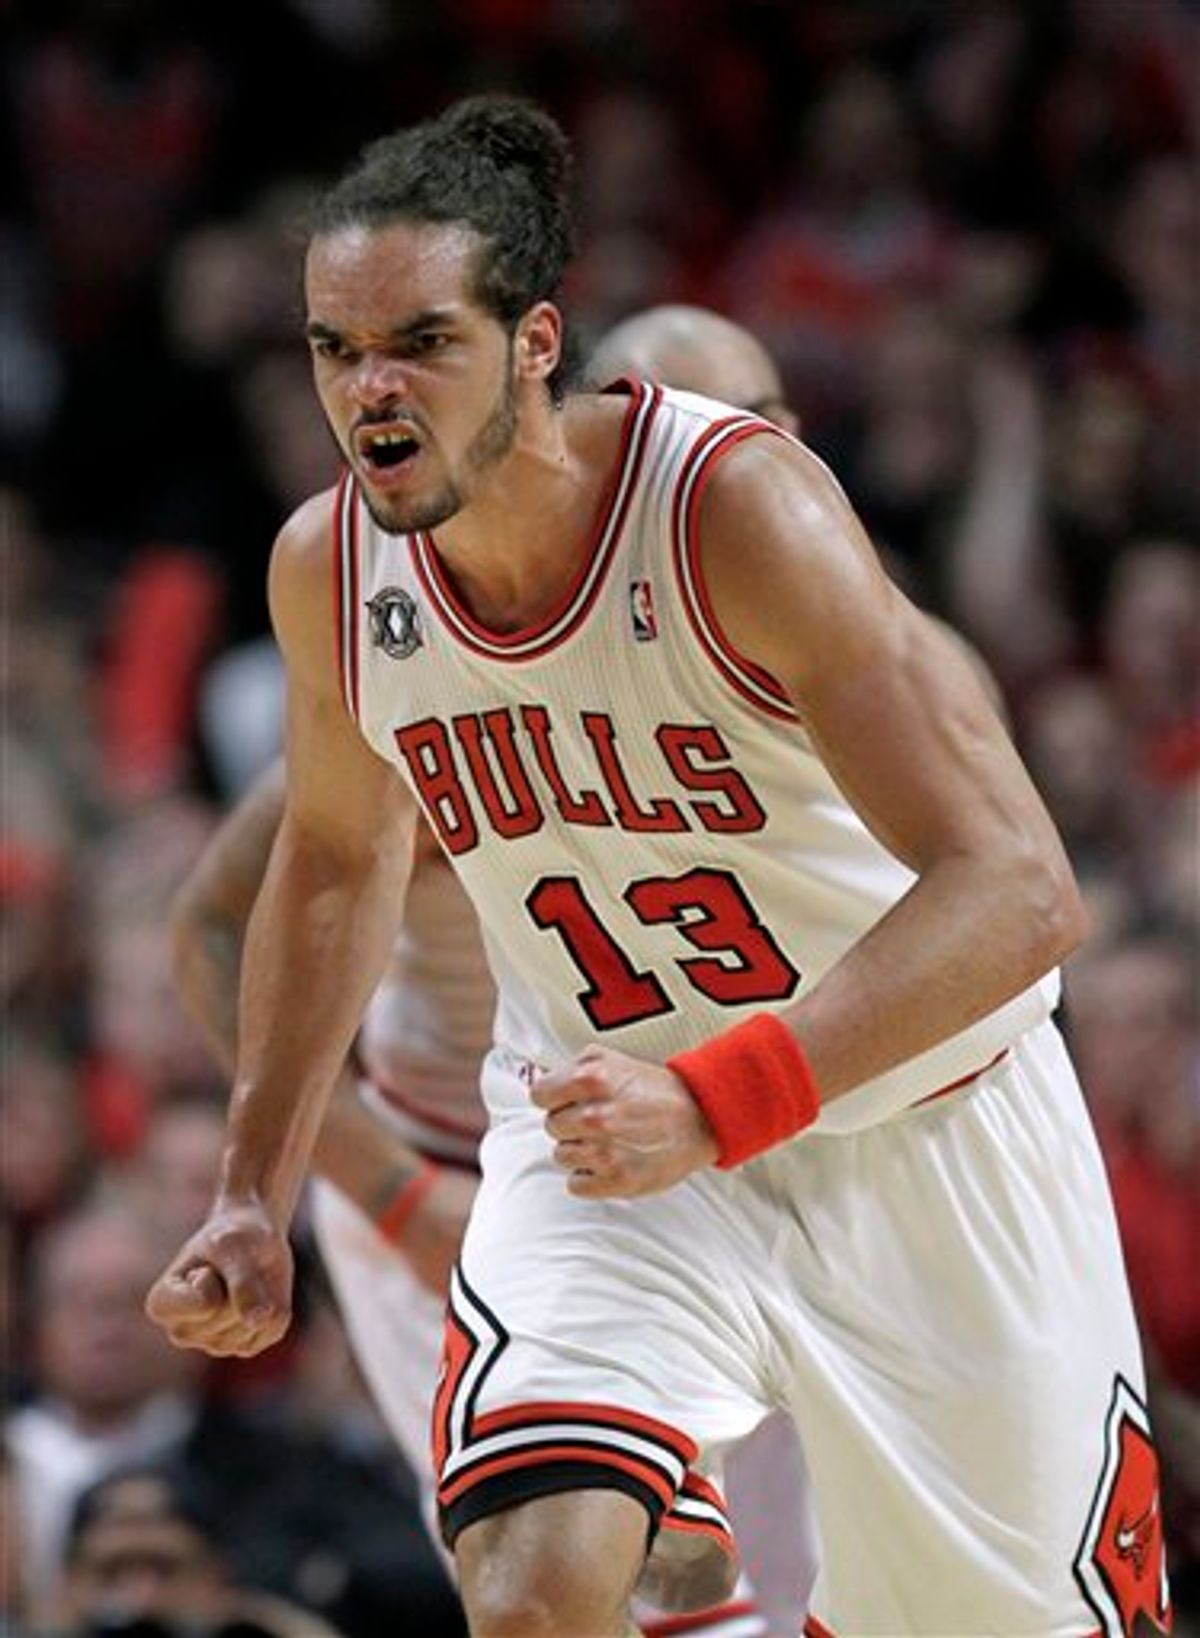 Chicago Bulls' Joakim Noah reacts after scoring a basket during the second quarter in Game 2 of a first-round NBA playoff basketball series against the Indiana Pacers, in Chicago on Monday, April 18, 2011. (AP Photo/Nam Y. Huh) (AP)